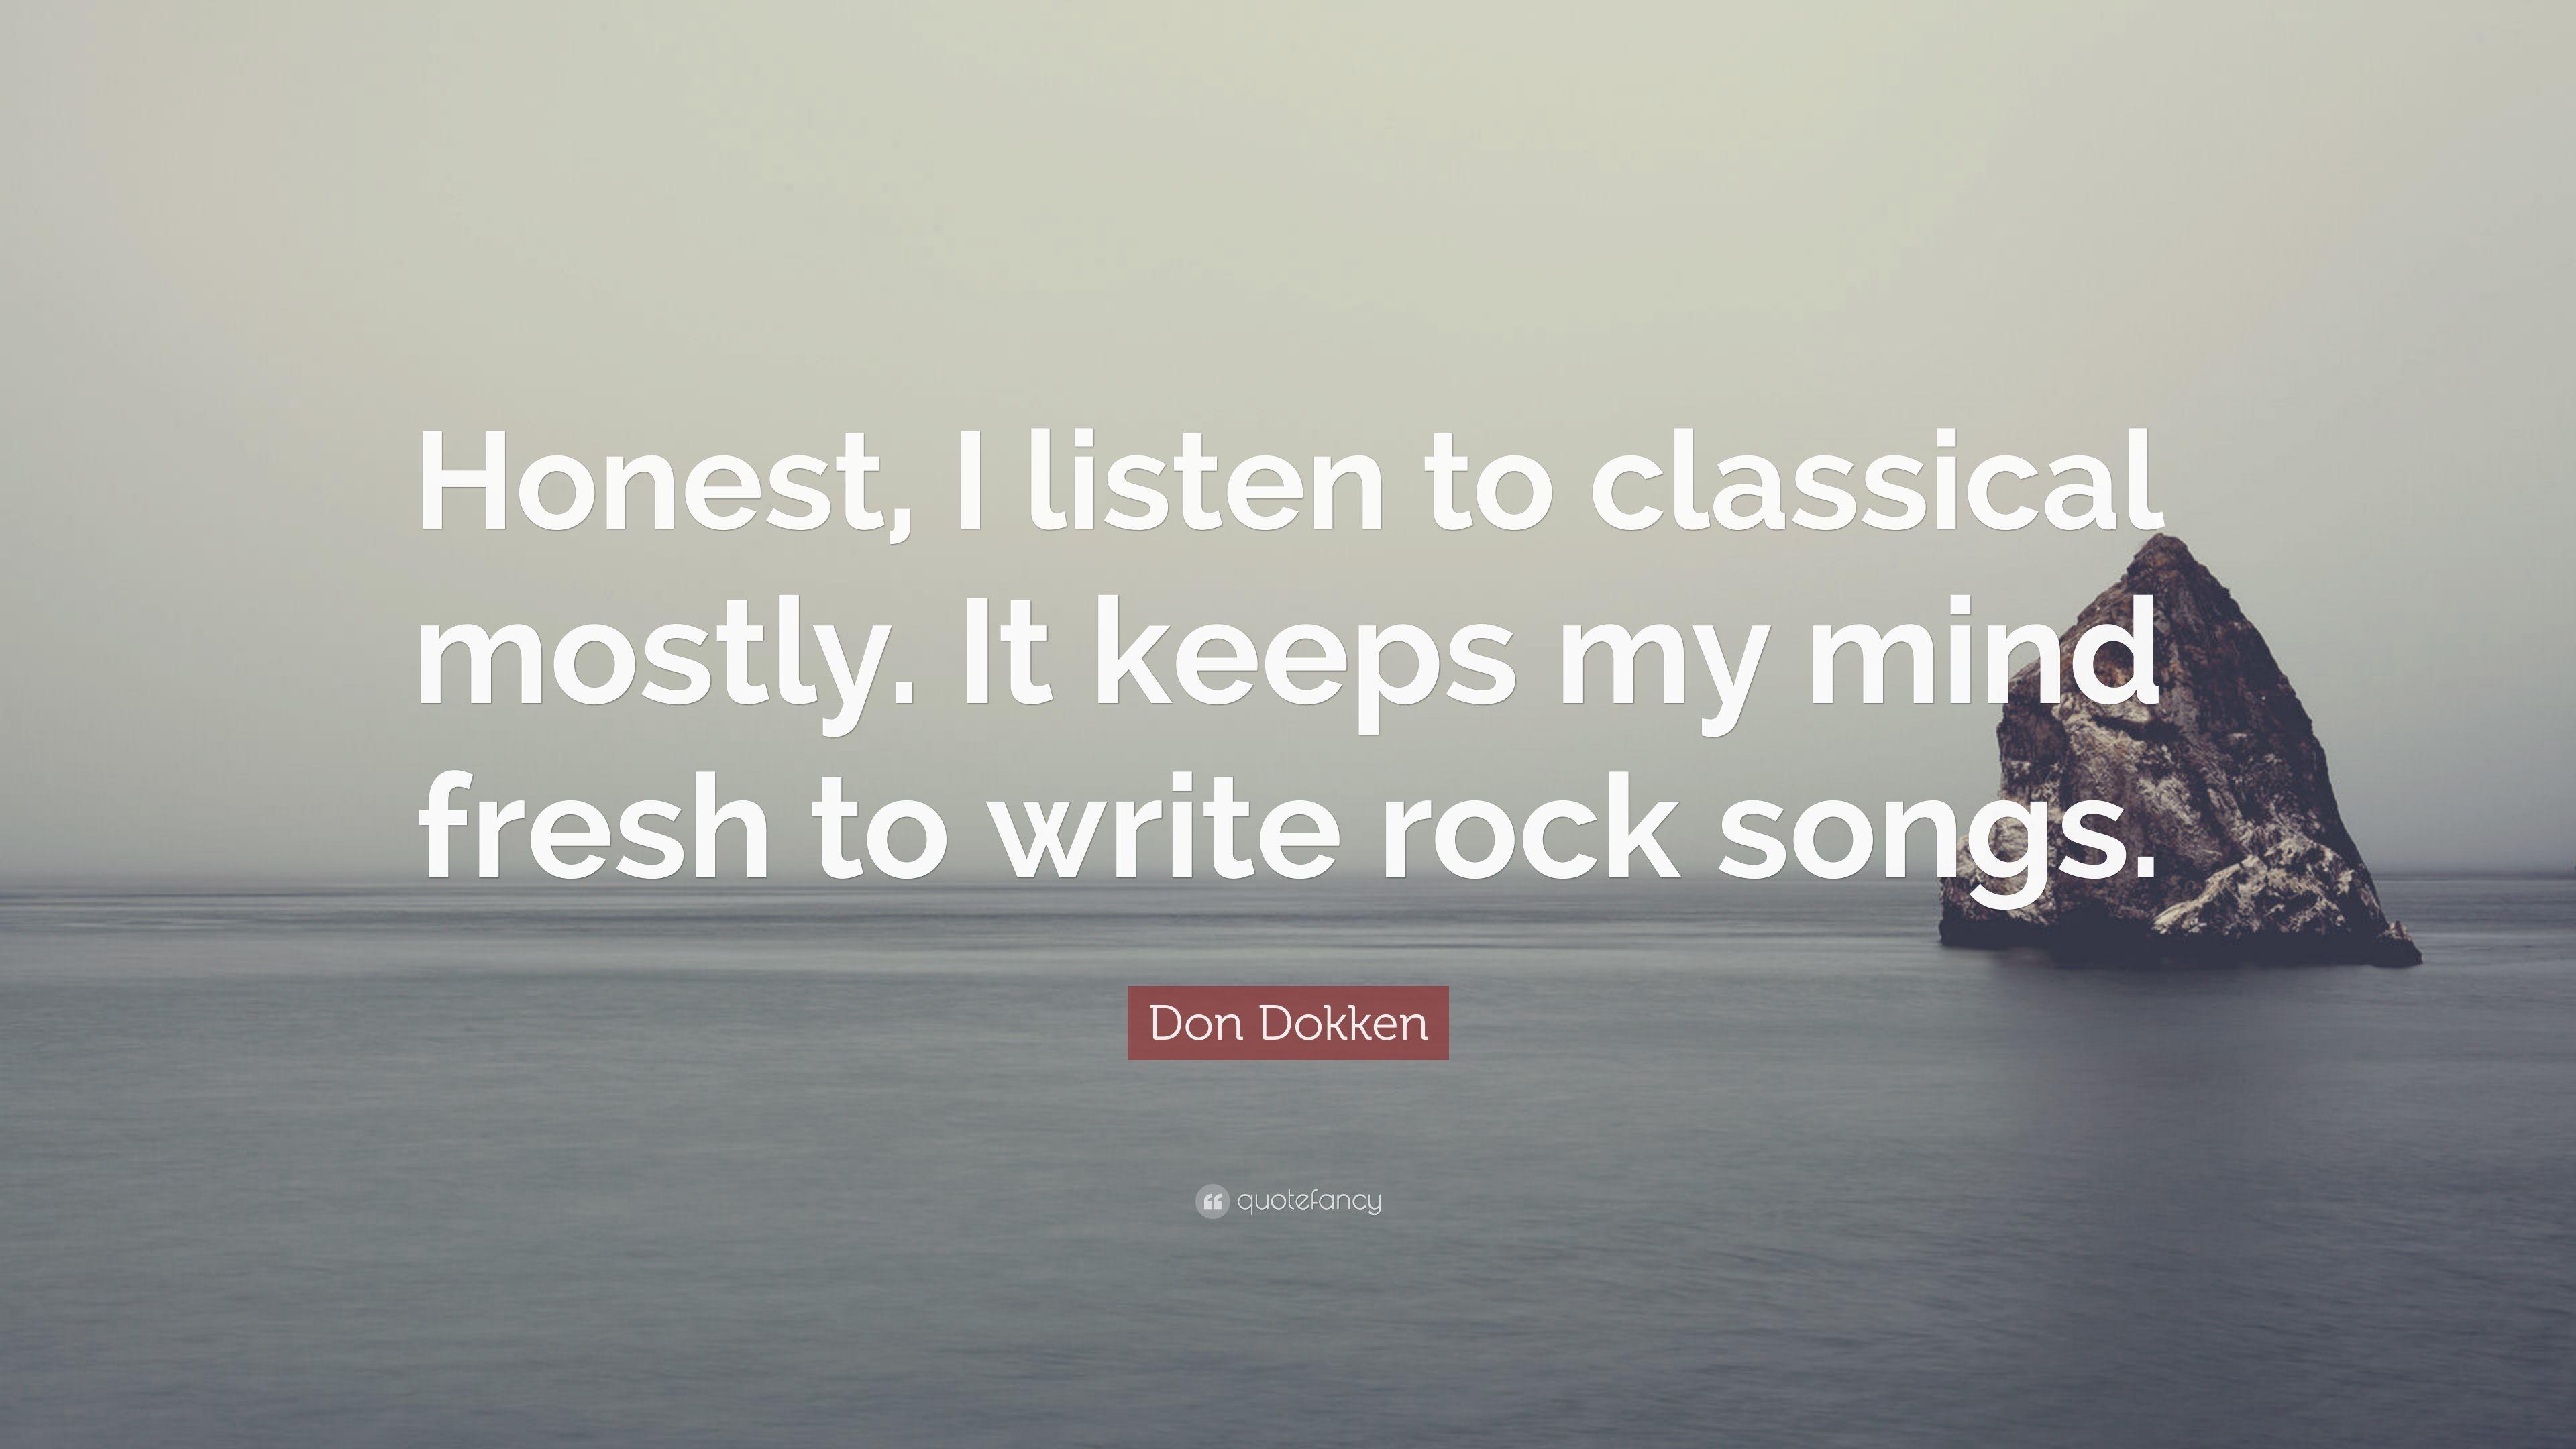 Don Dokken Quote: “Honest, I listen to classical mostly. It keeps